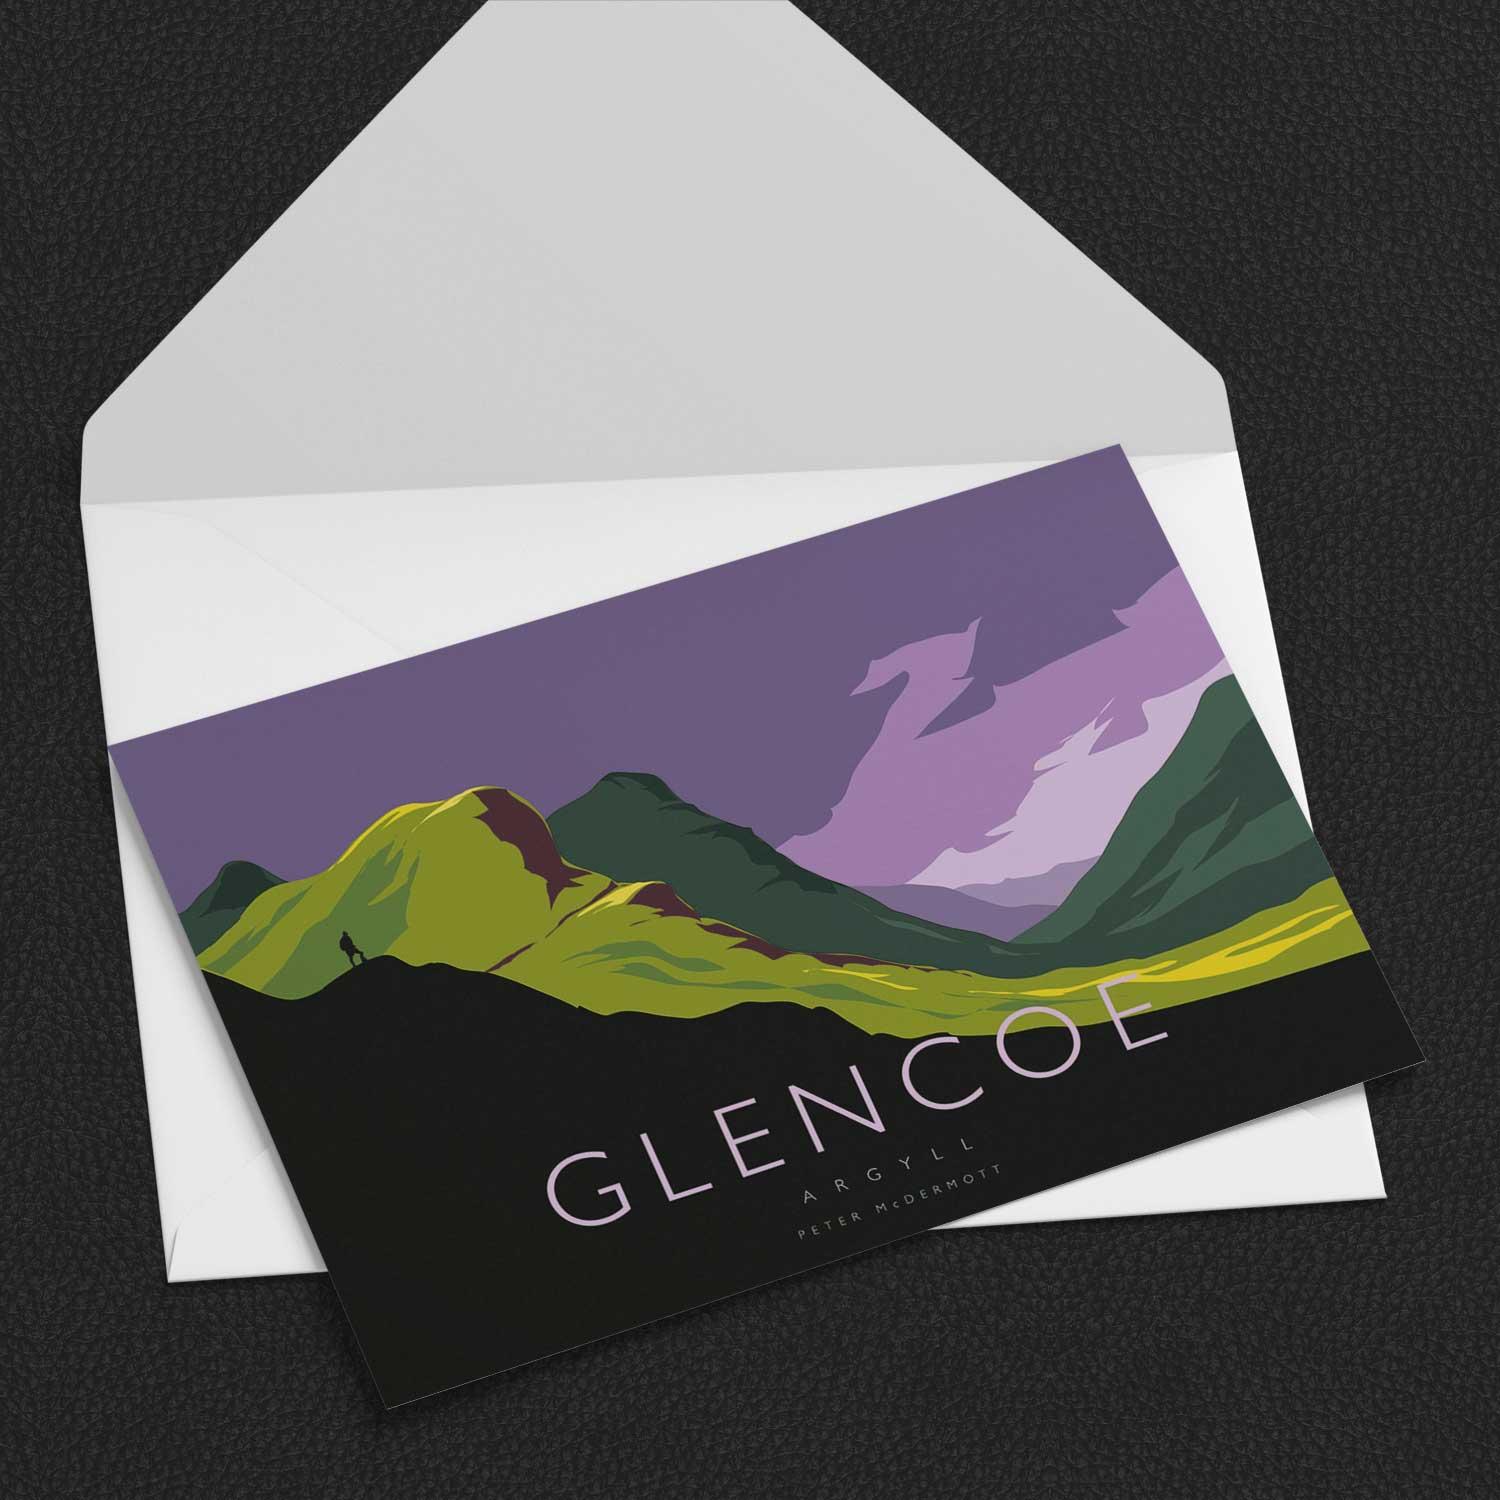 Glencoe Greeting Card from an original painting by artist Peter McDermott